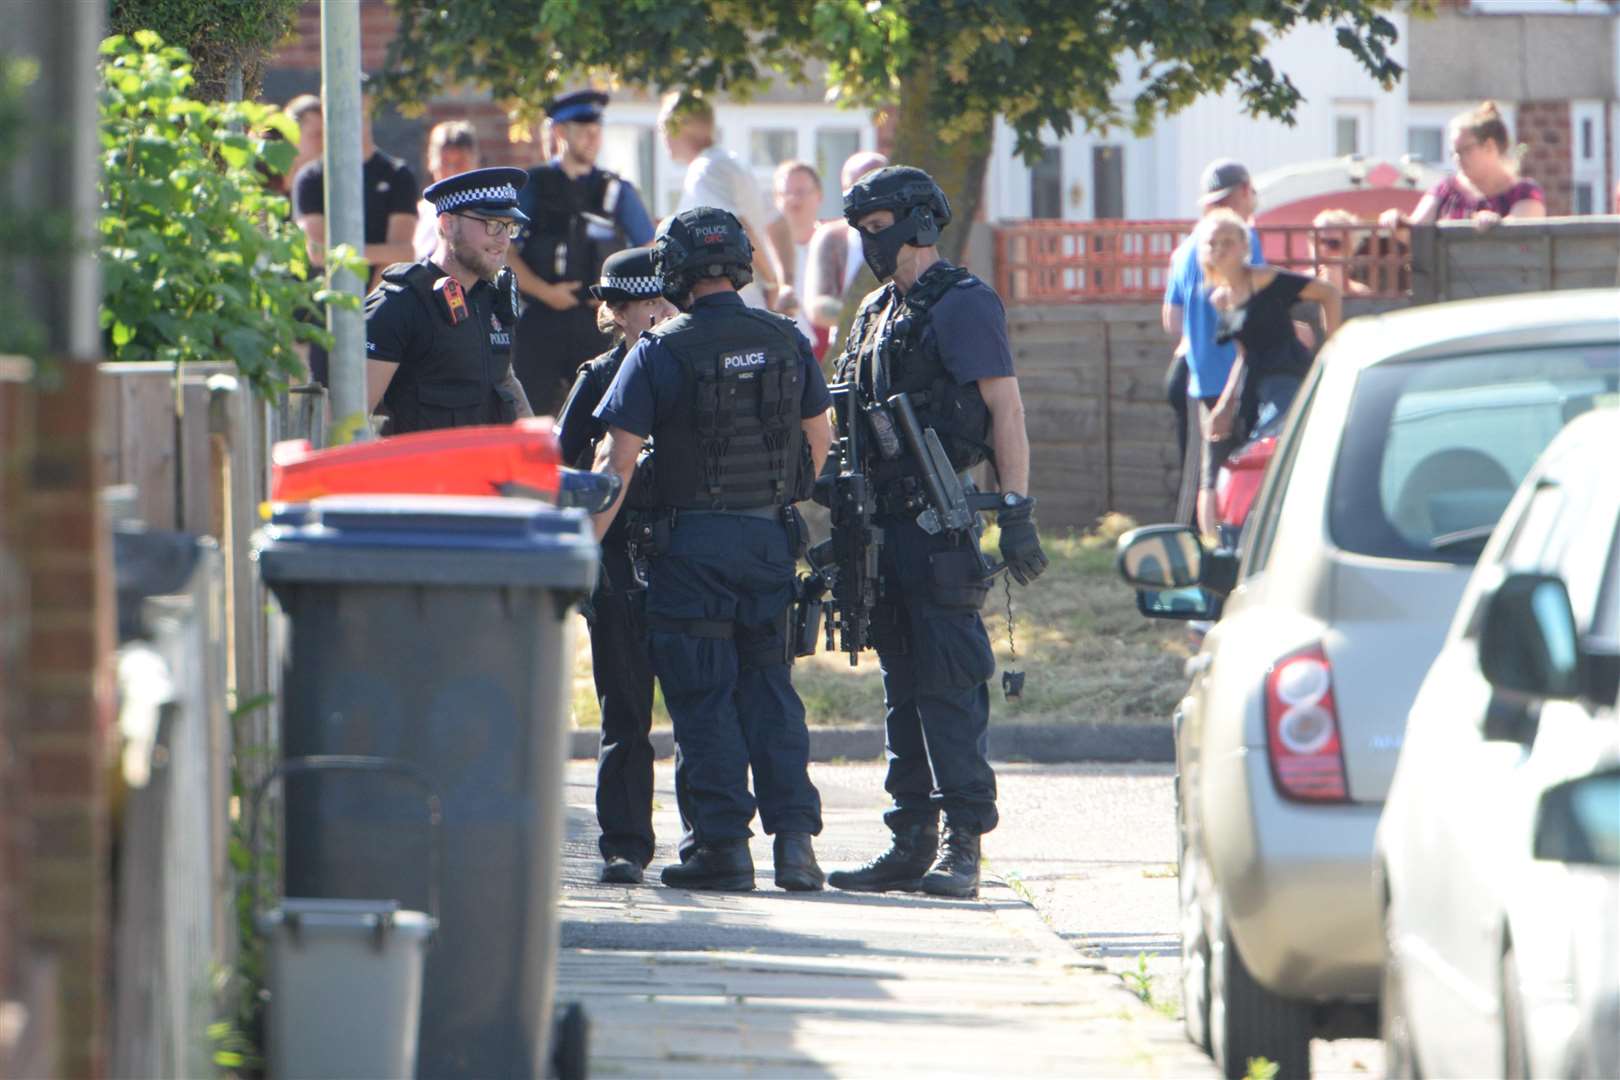 Residents look on during the heavy police presence Picture: Chris Davey